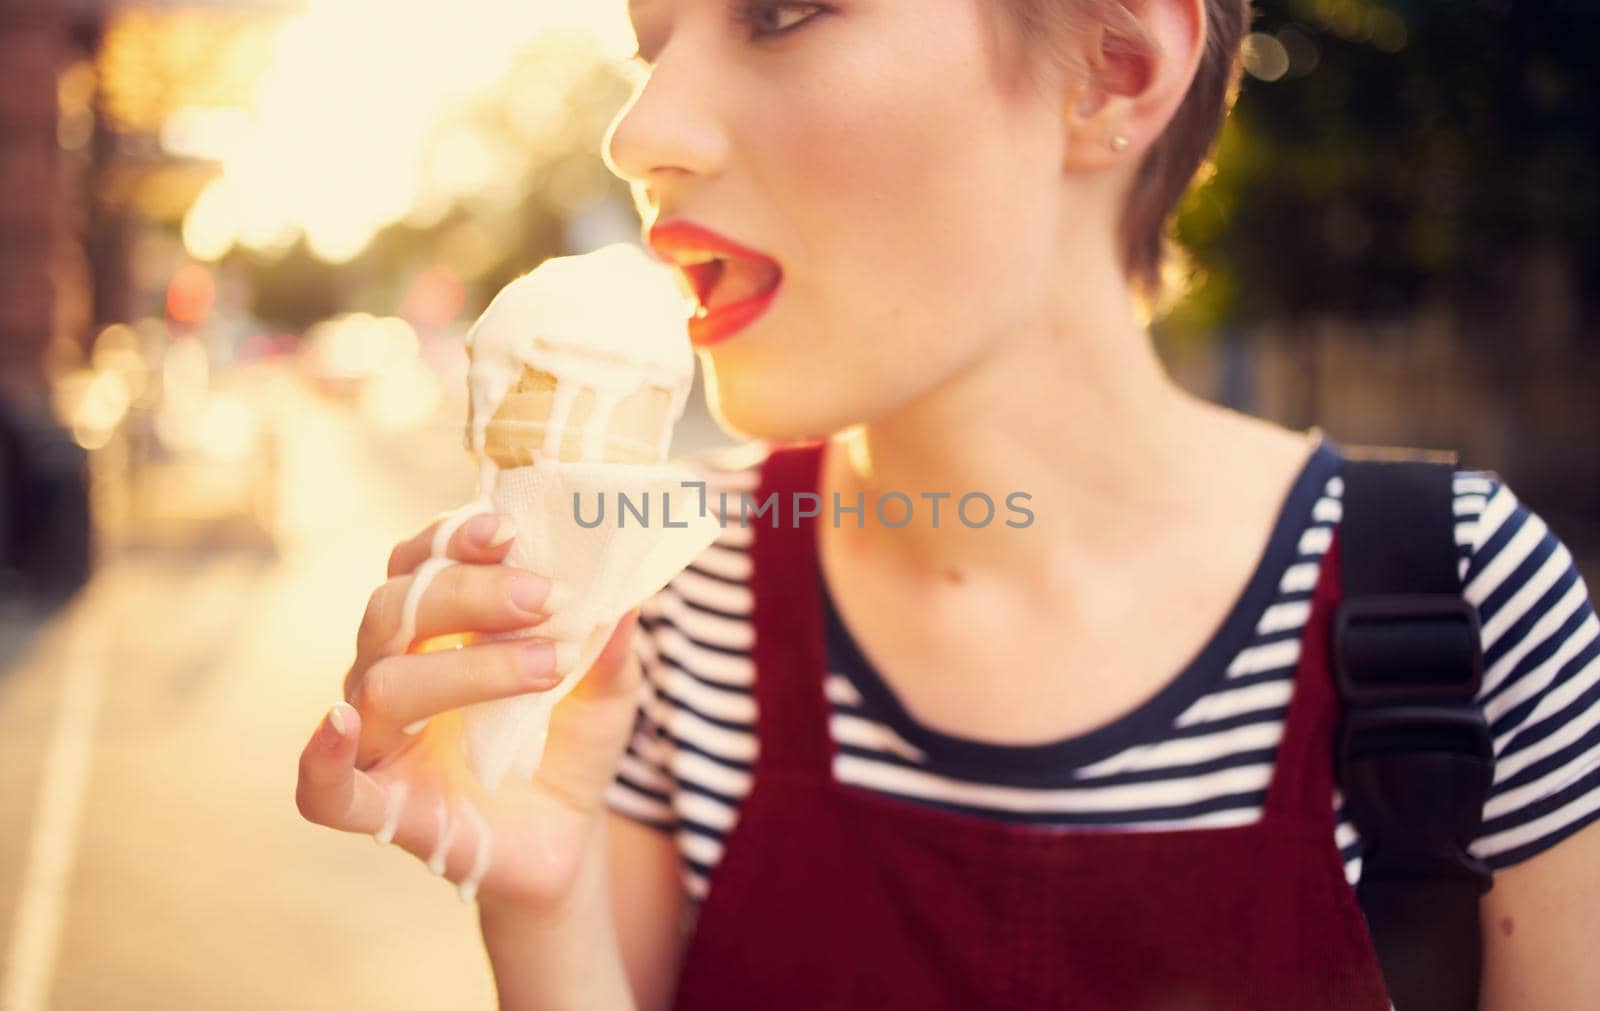 pretty woman with short hair eating ice cream outdoors leisure walk by SHOTPRIME